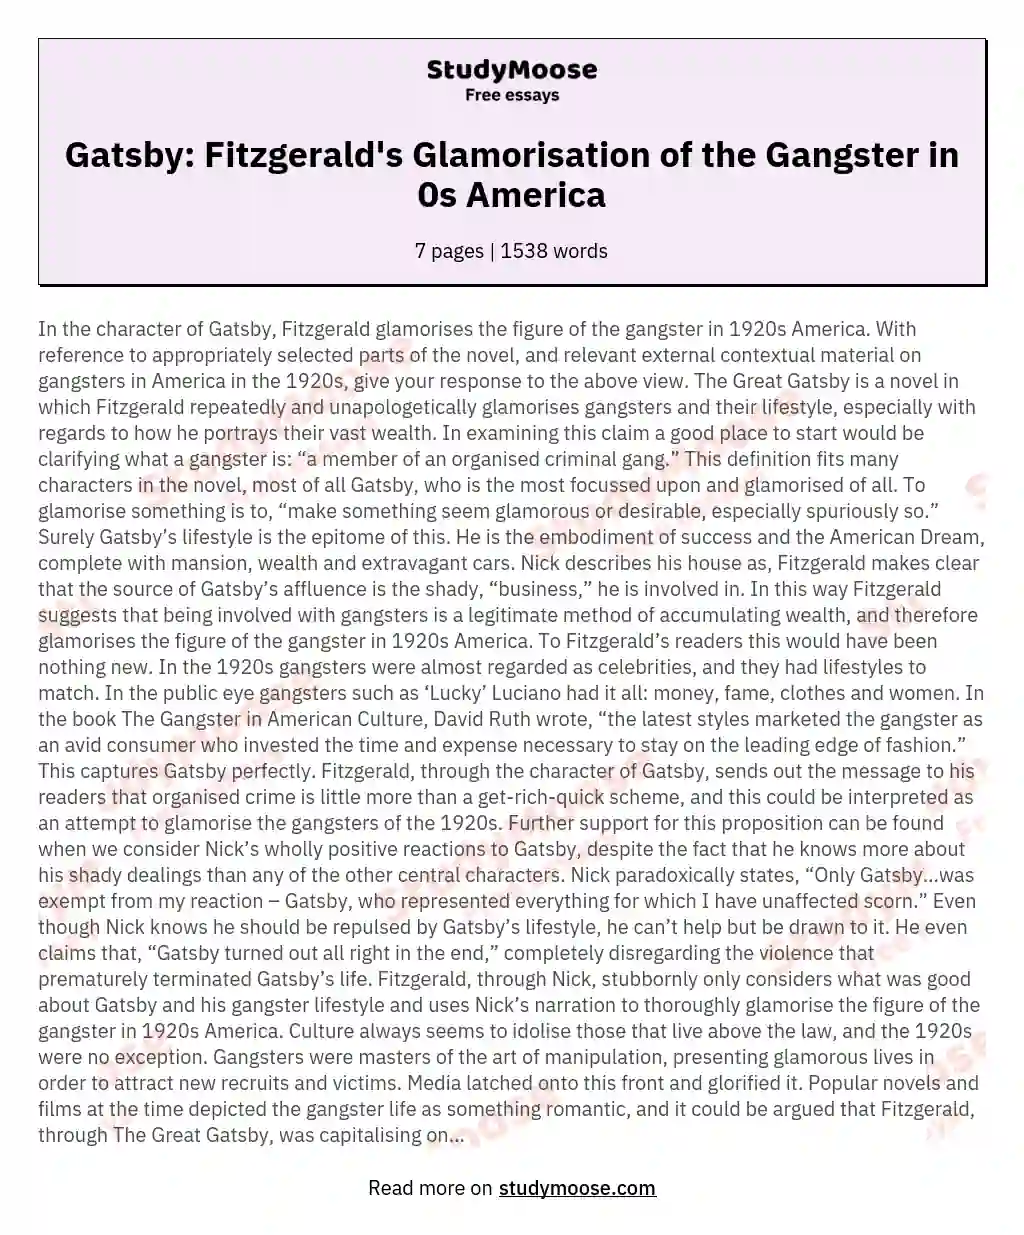 In the character of Gatsby, Fitzgerald glamorises the figure of the gangster in 1920s America